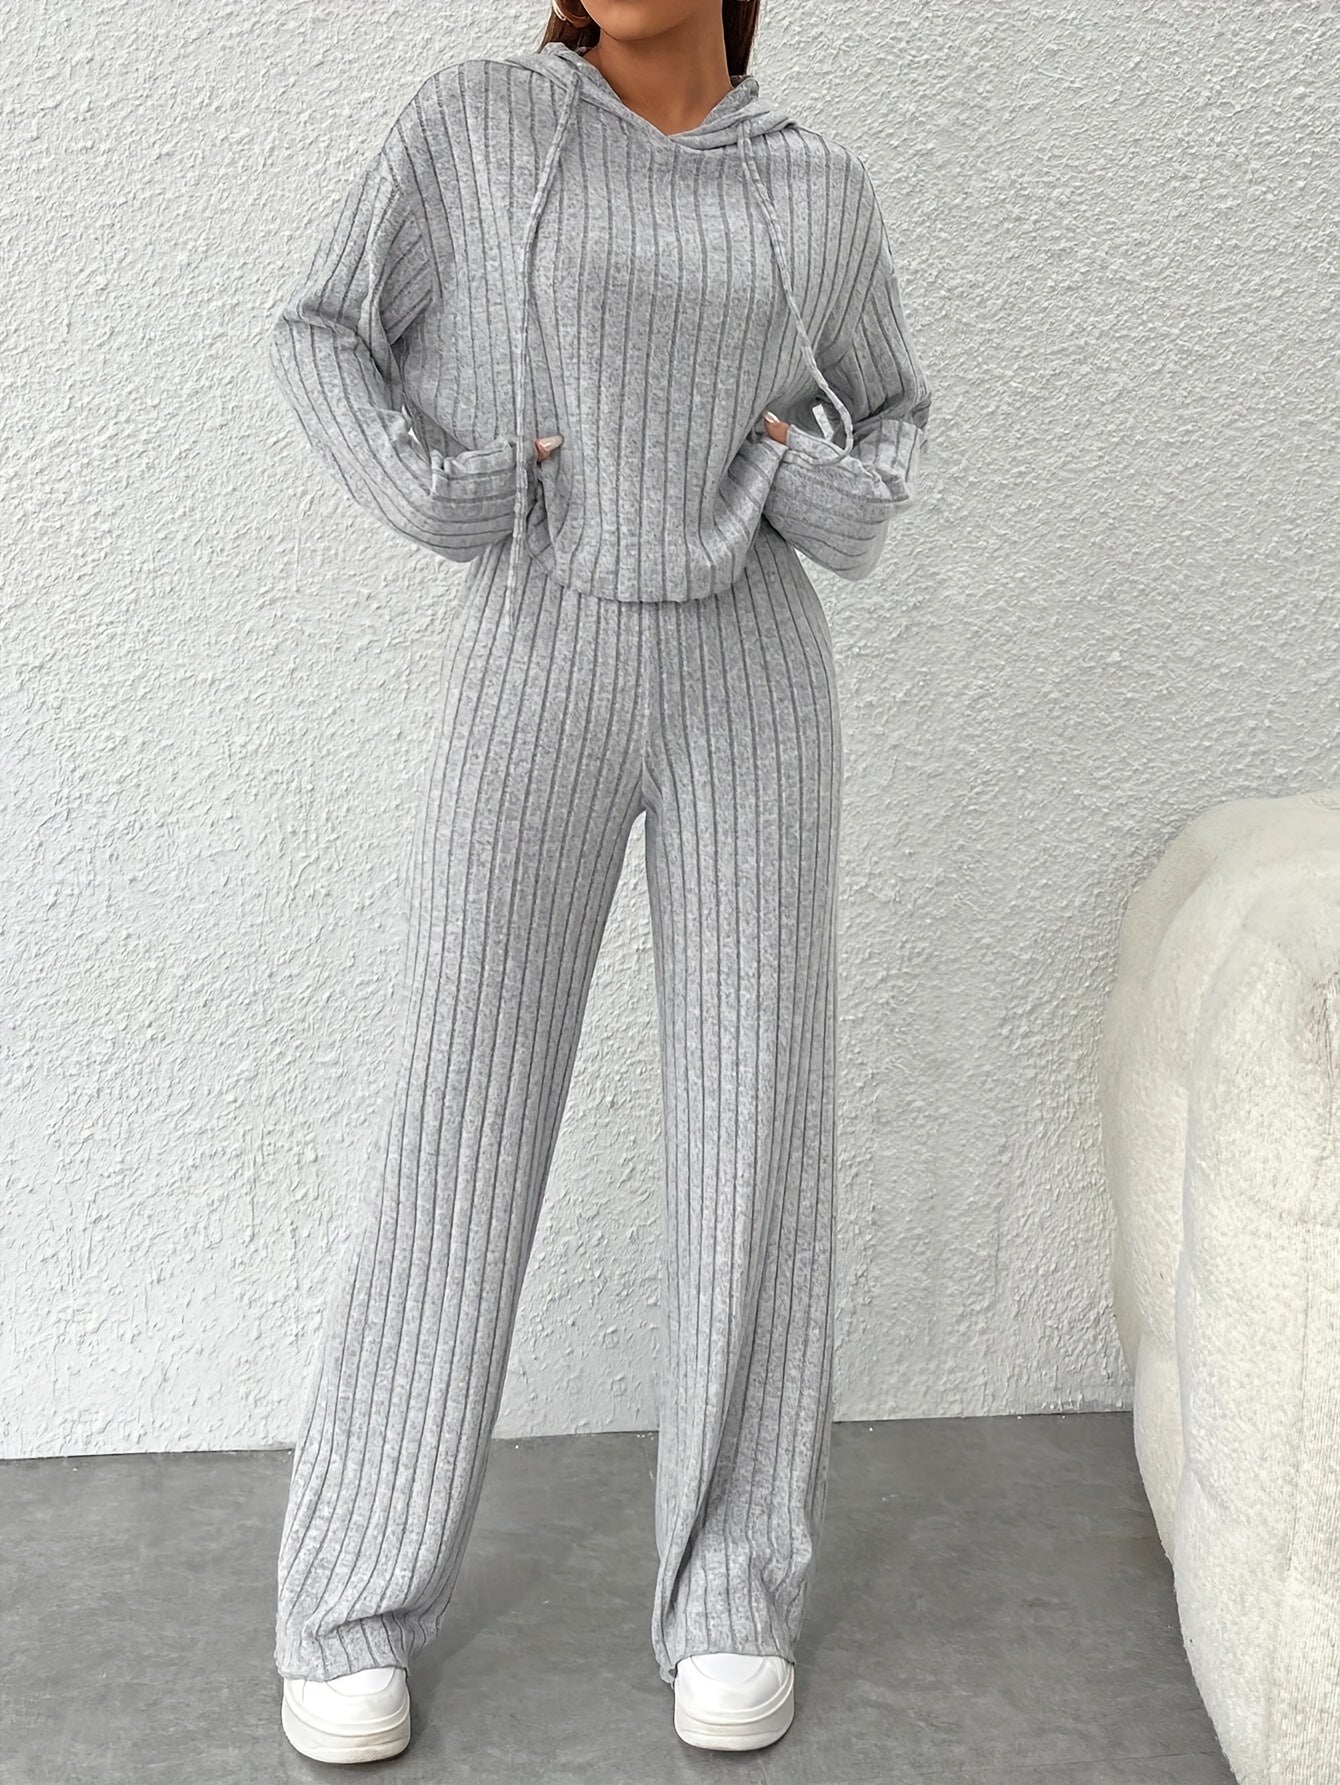 JENNIE Casual Ribbed Two-piece Set, Drawstring Long Sleeve Hoodie & Wide Leg Pants Outfits